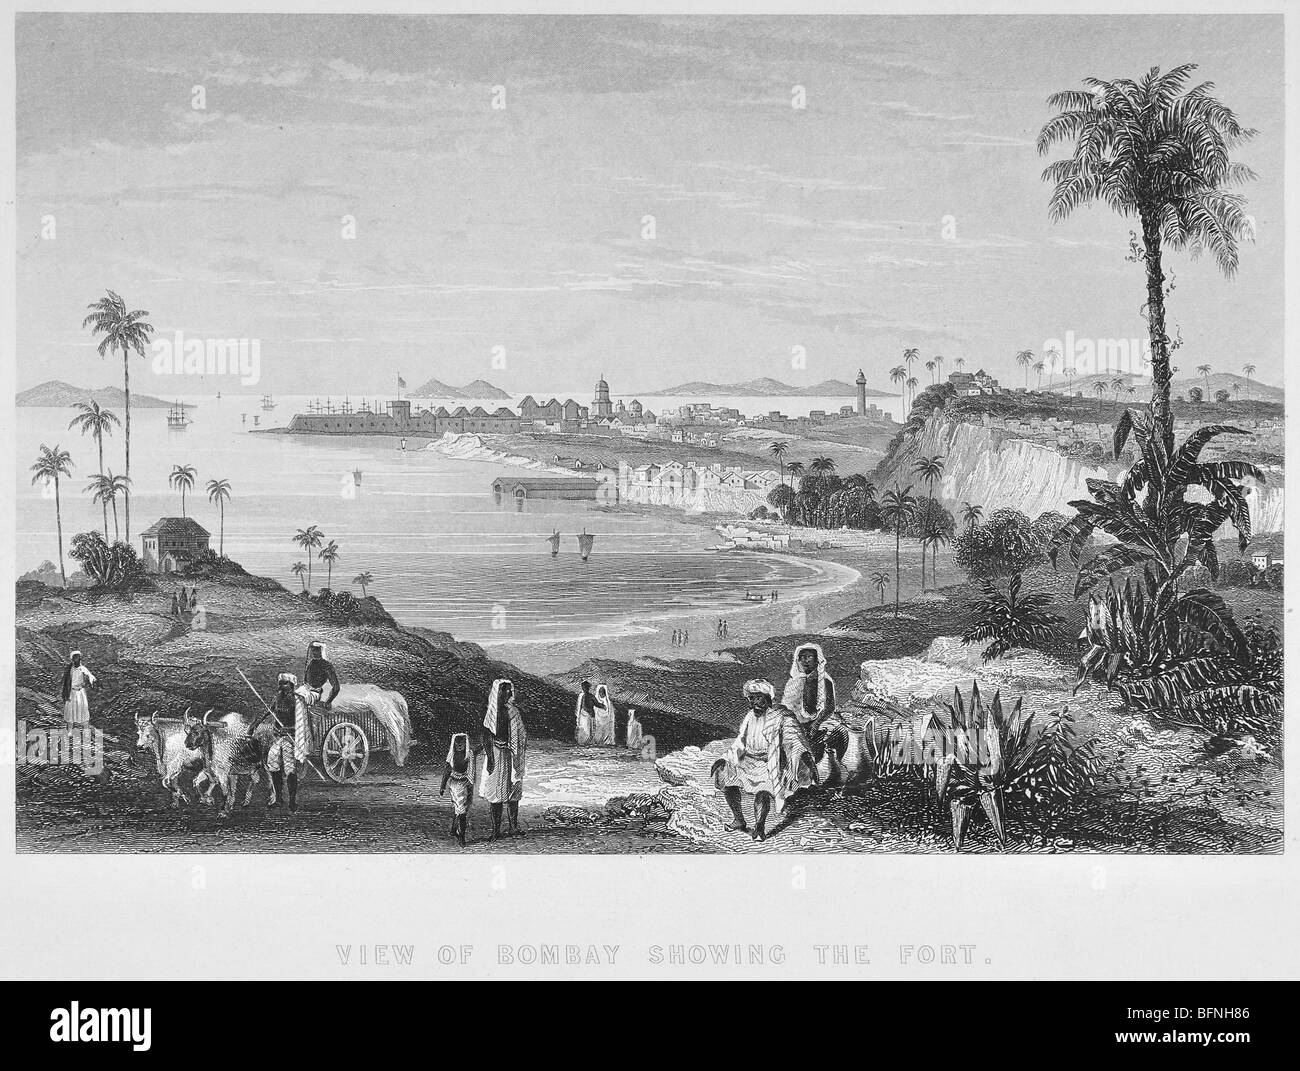 View of Bombay showing the fort Stock Photo